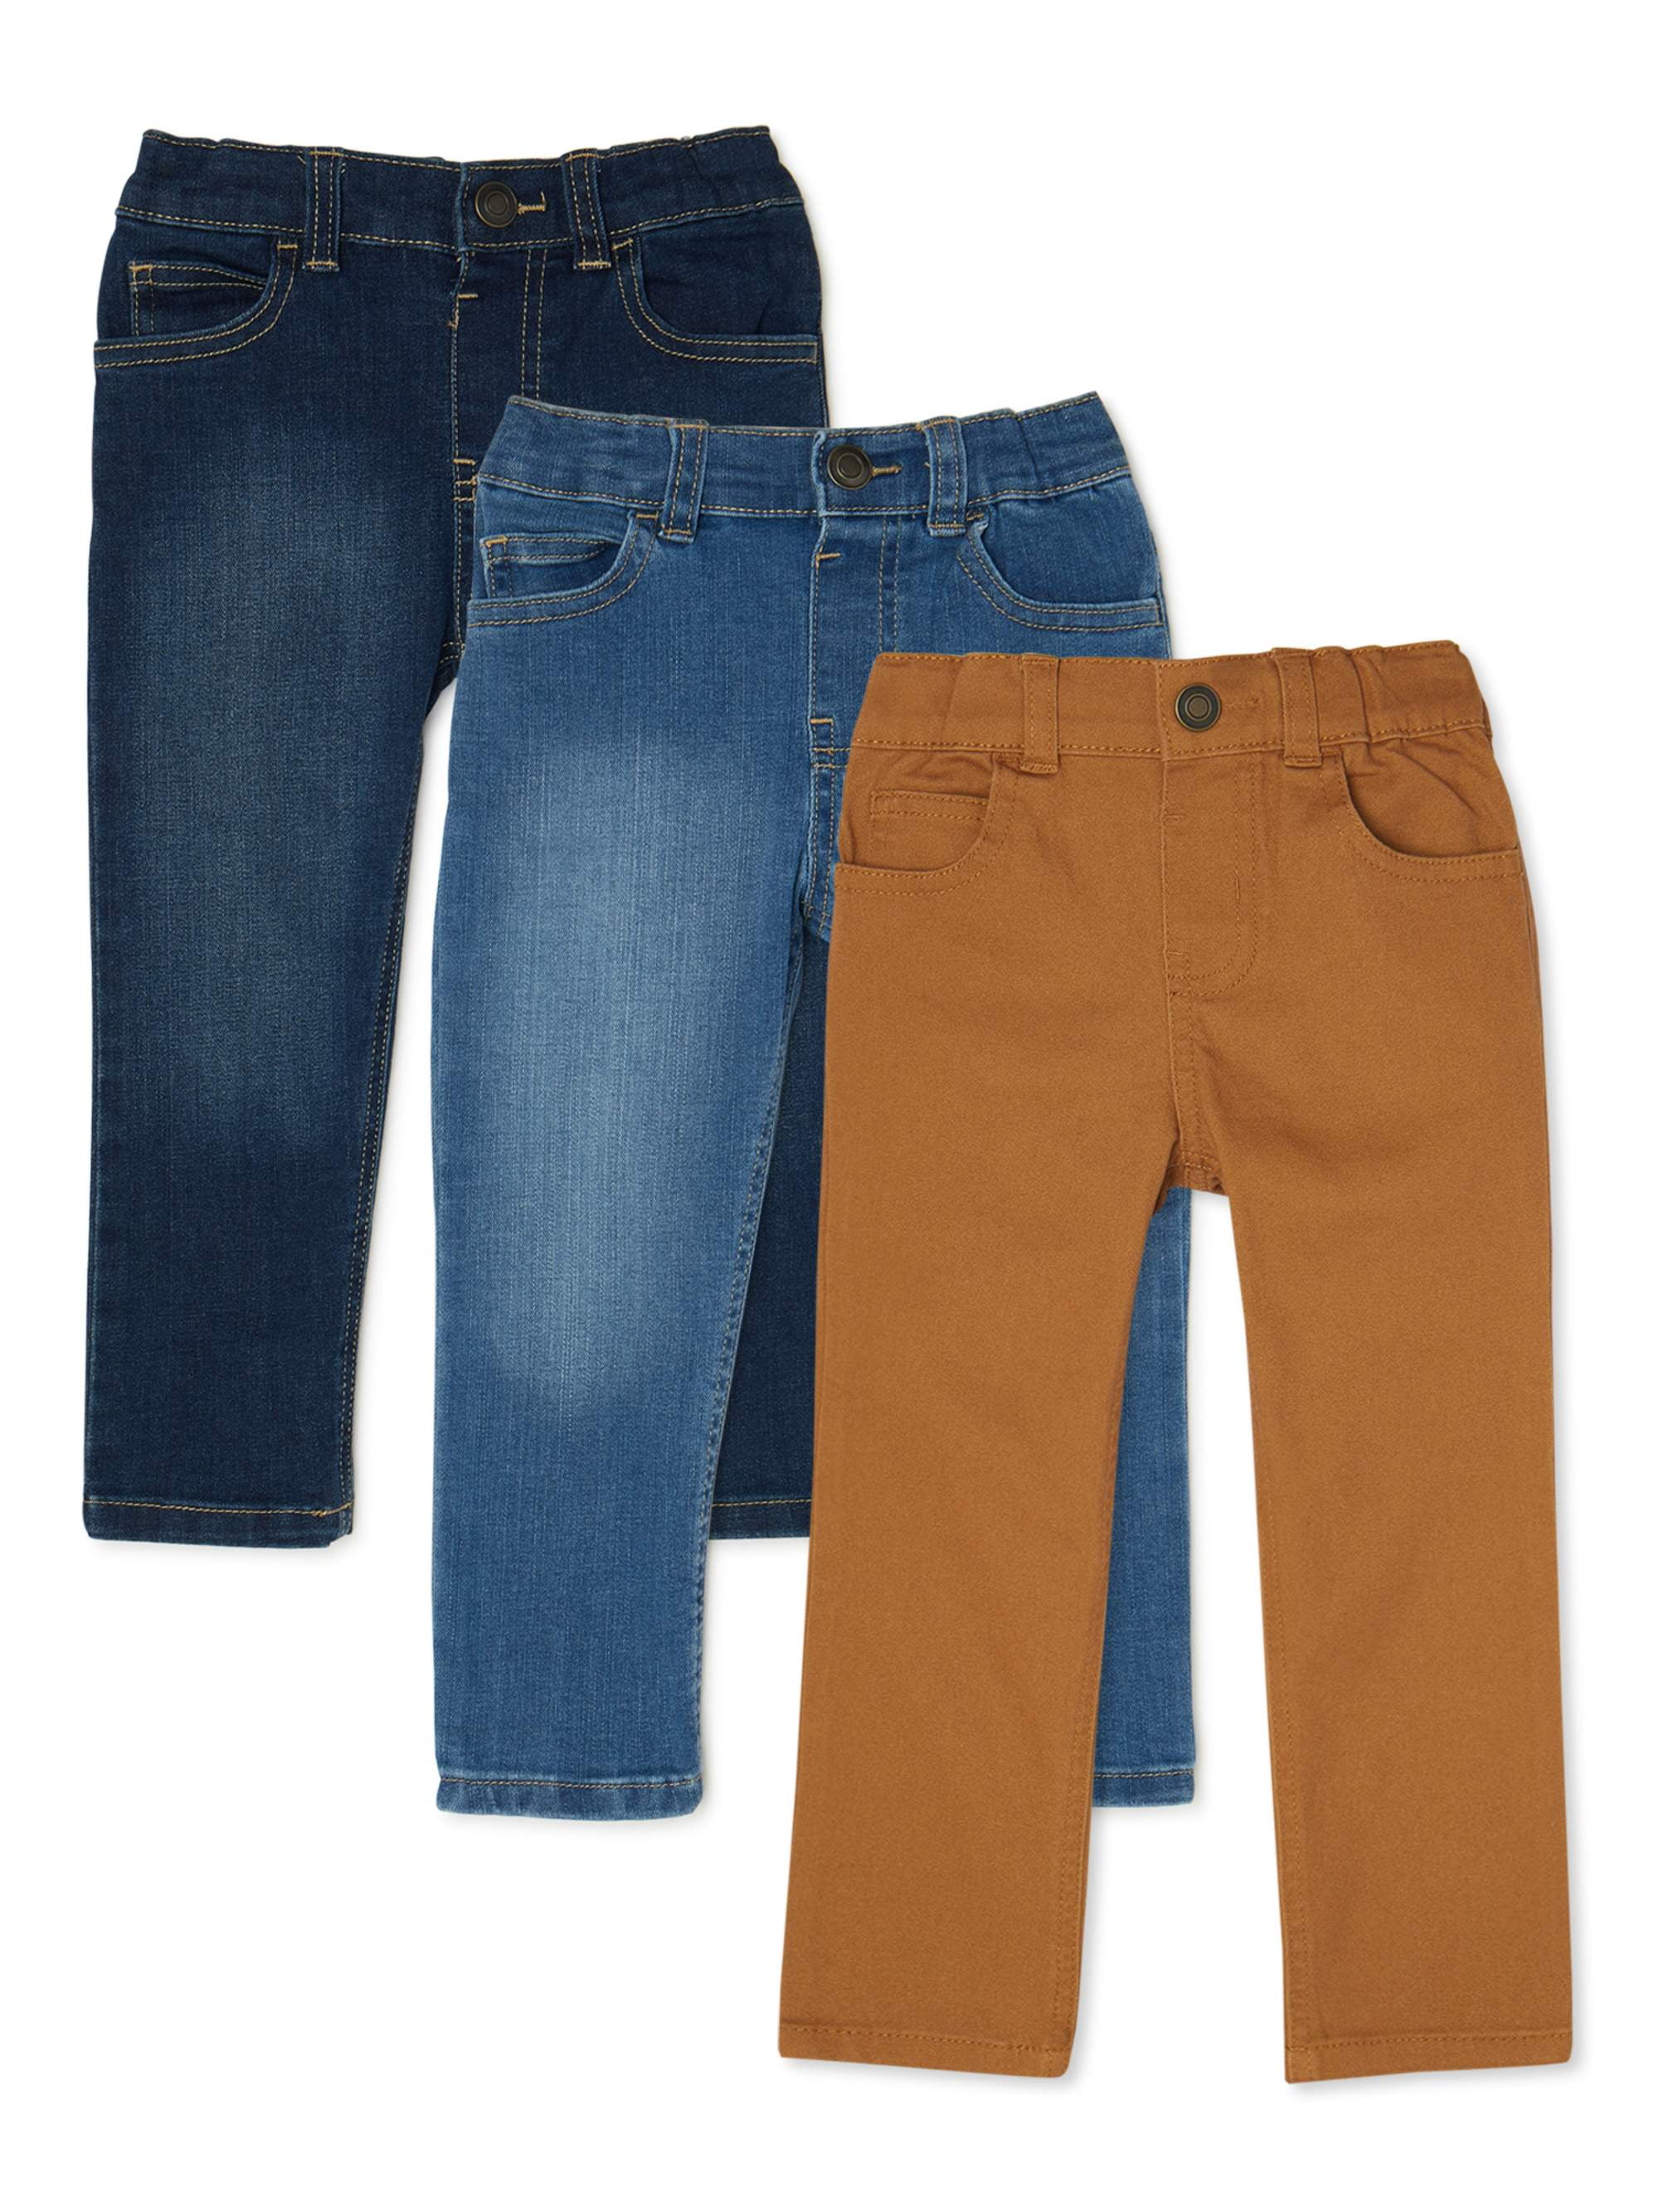 5t jeans on sale